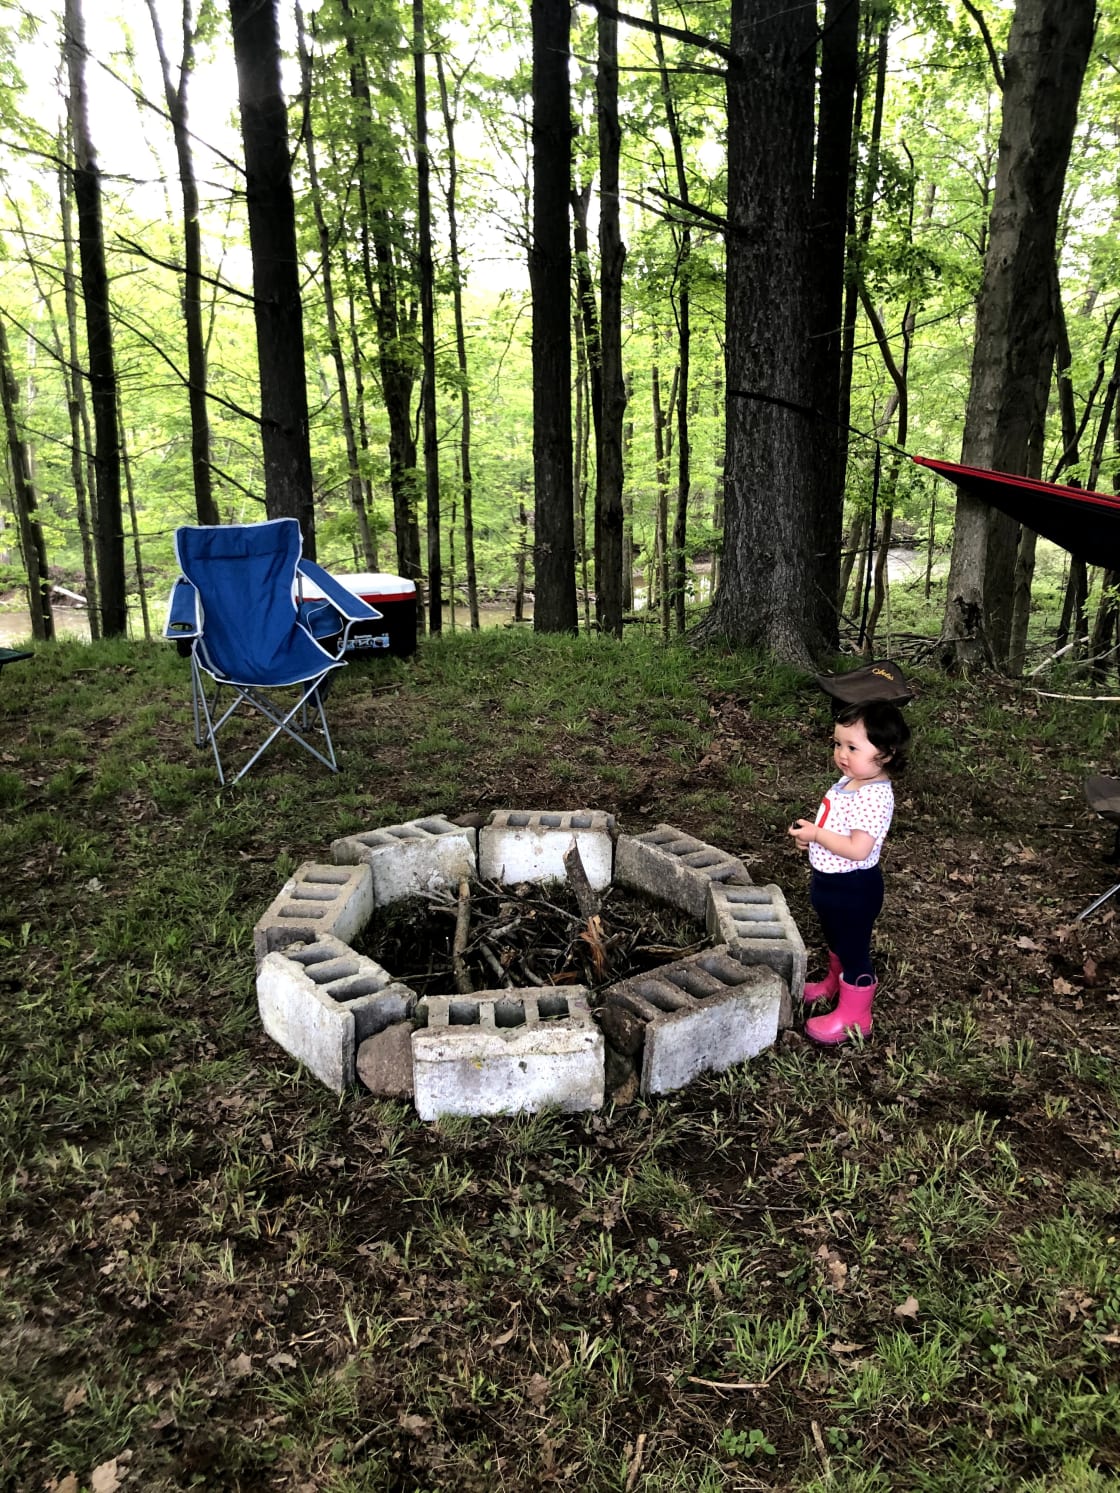 Closer view of the fire ring, and our 1.5 year old daughter!